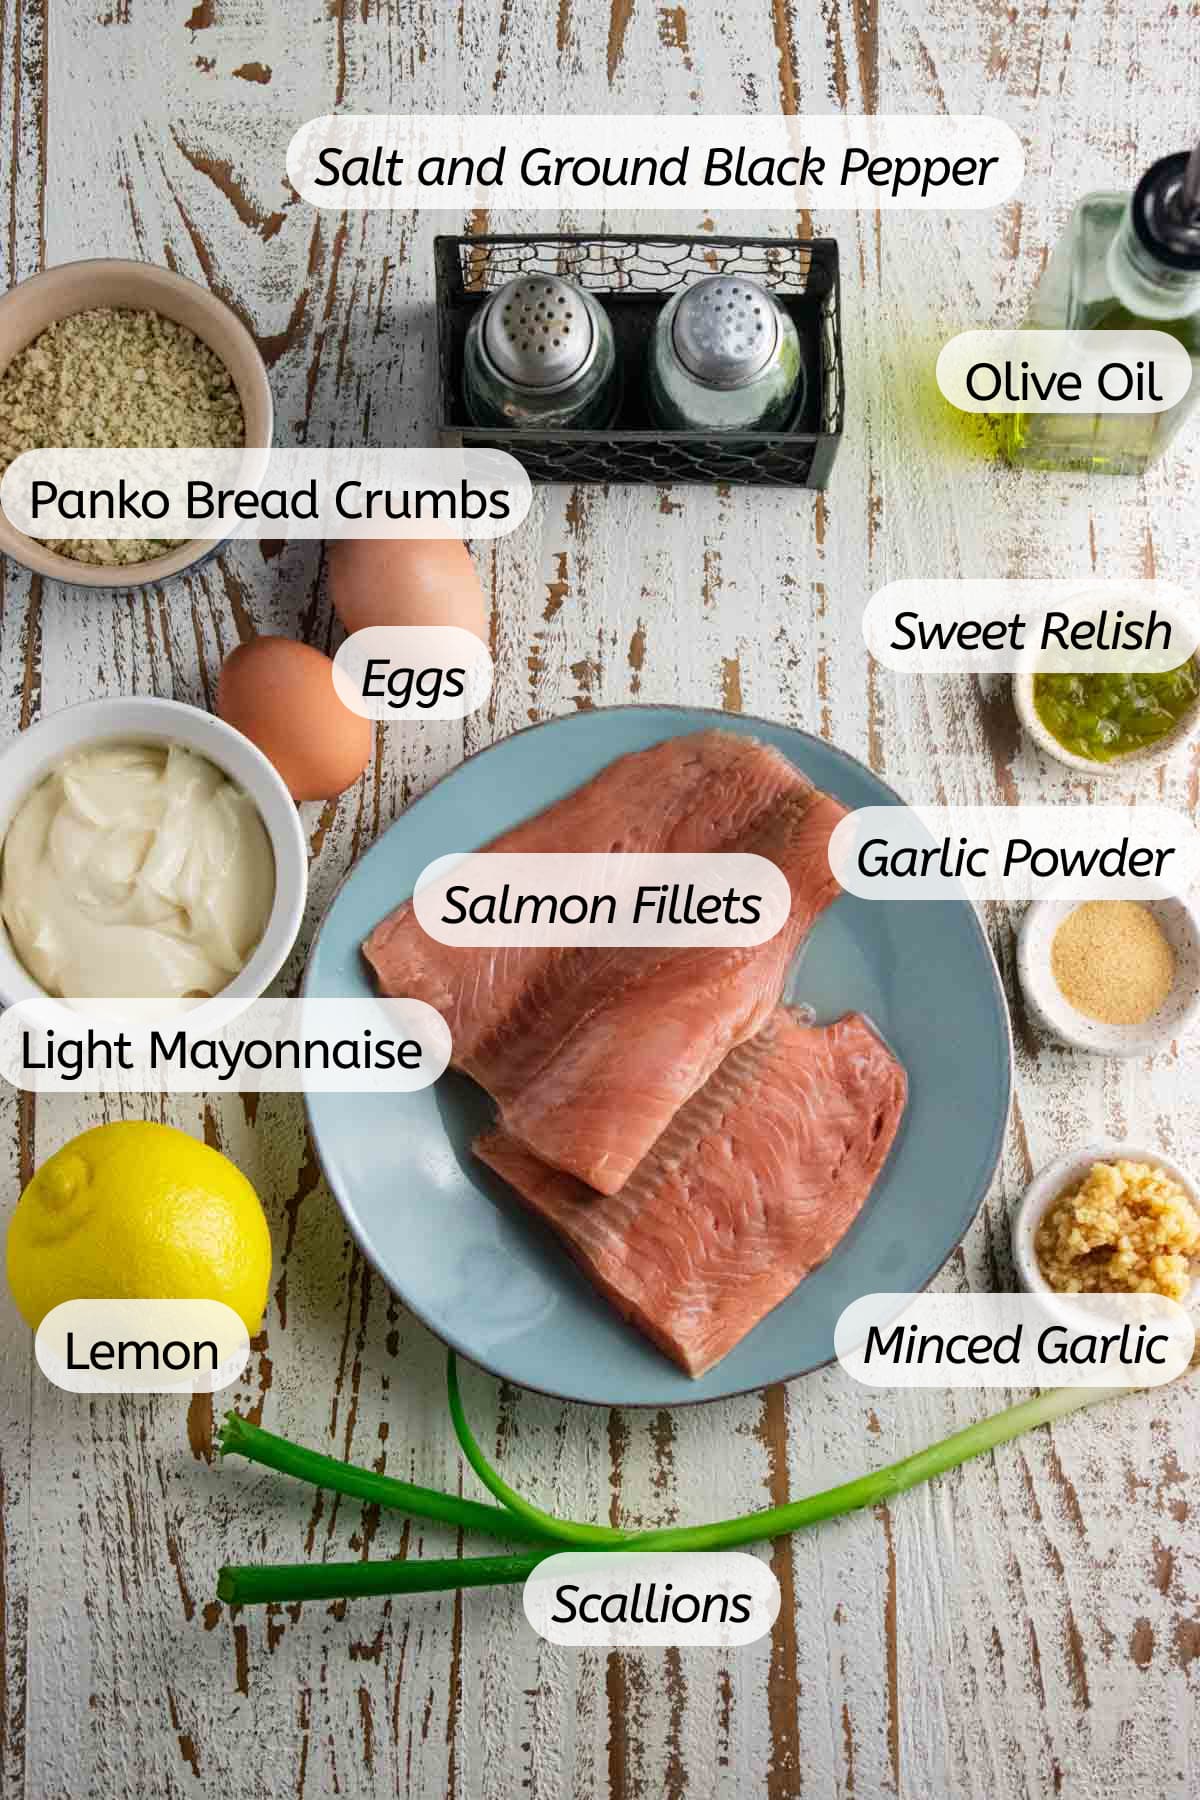 A birds-eye view of all the ingredients needed to make this panko salmon dish with labels included.